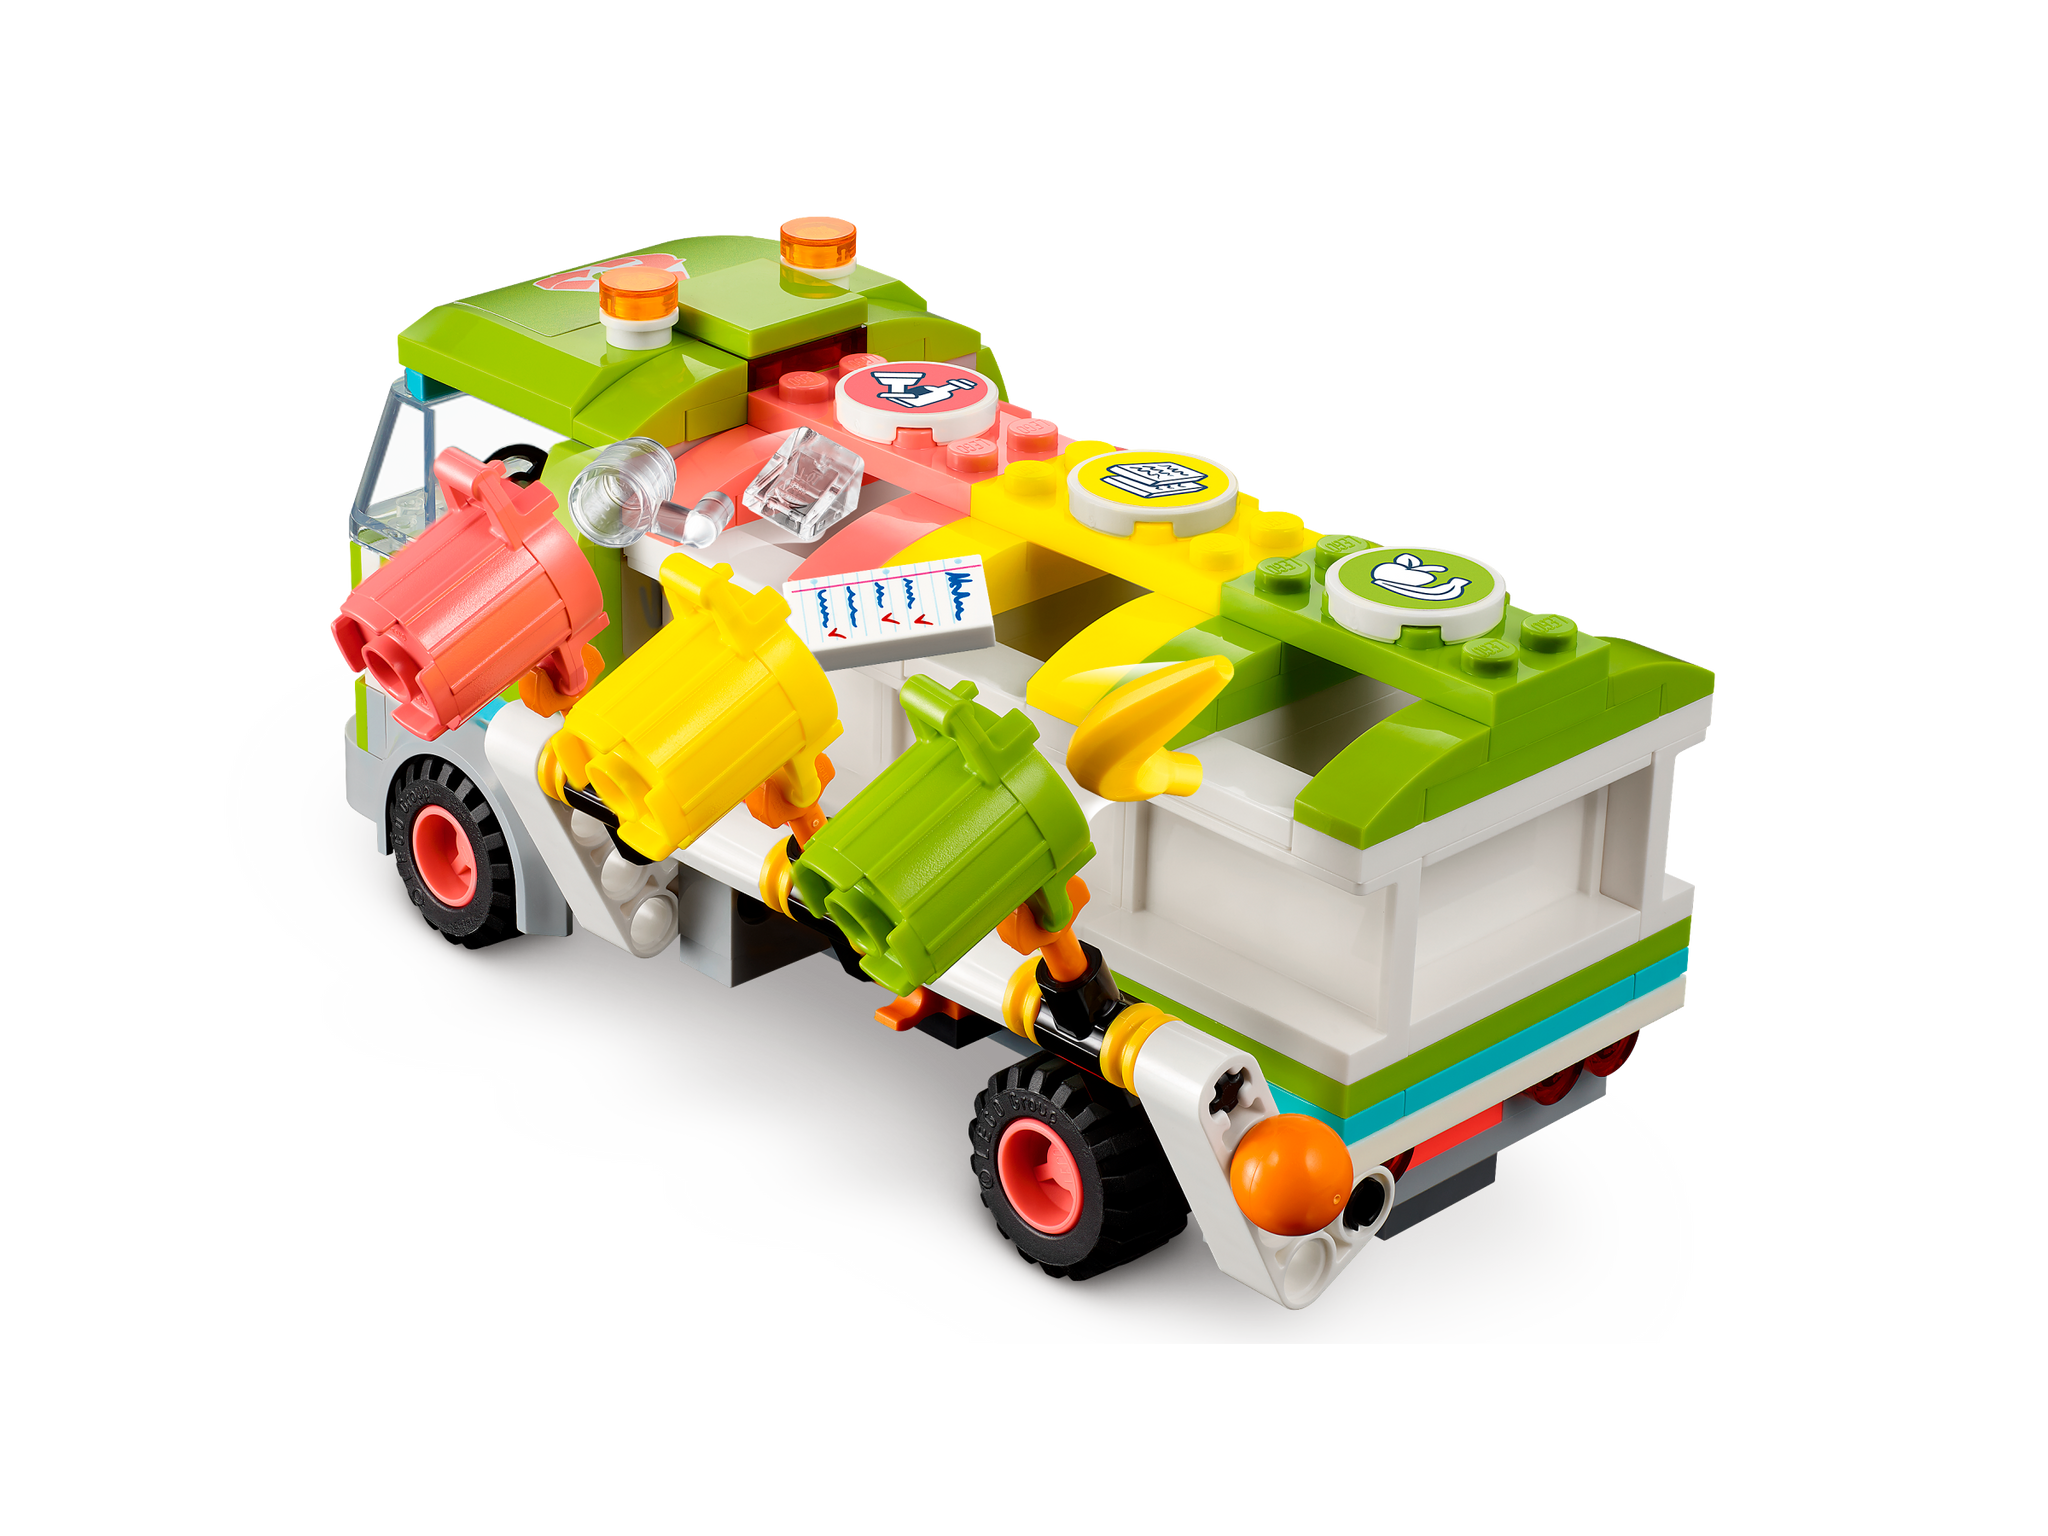 41712 Recycling Truck – Skeeter's Toybox